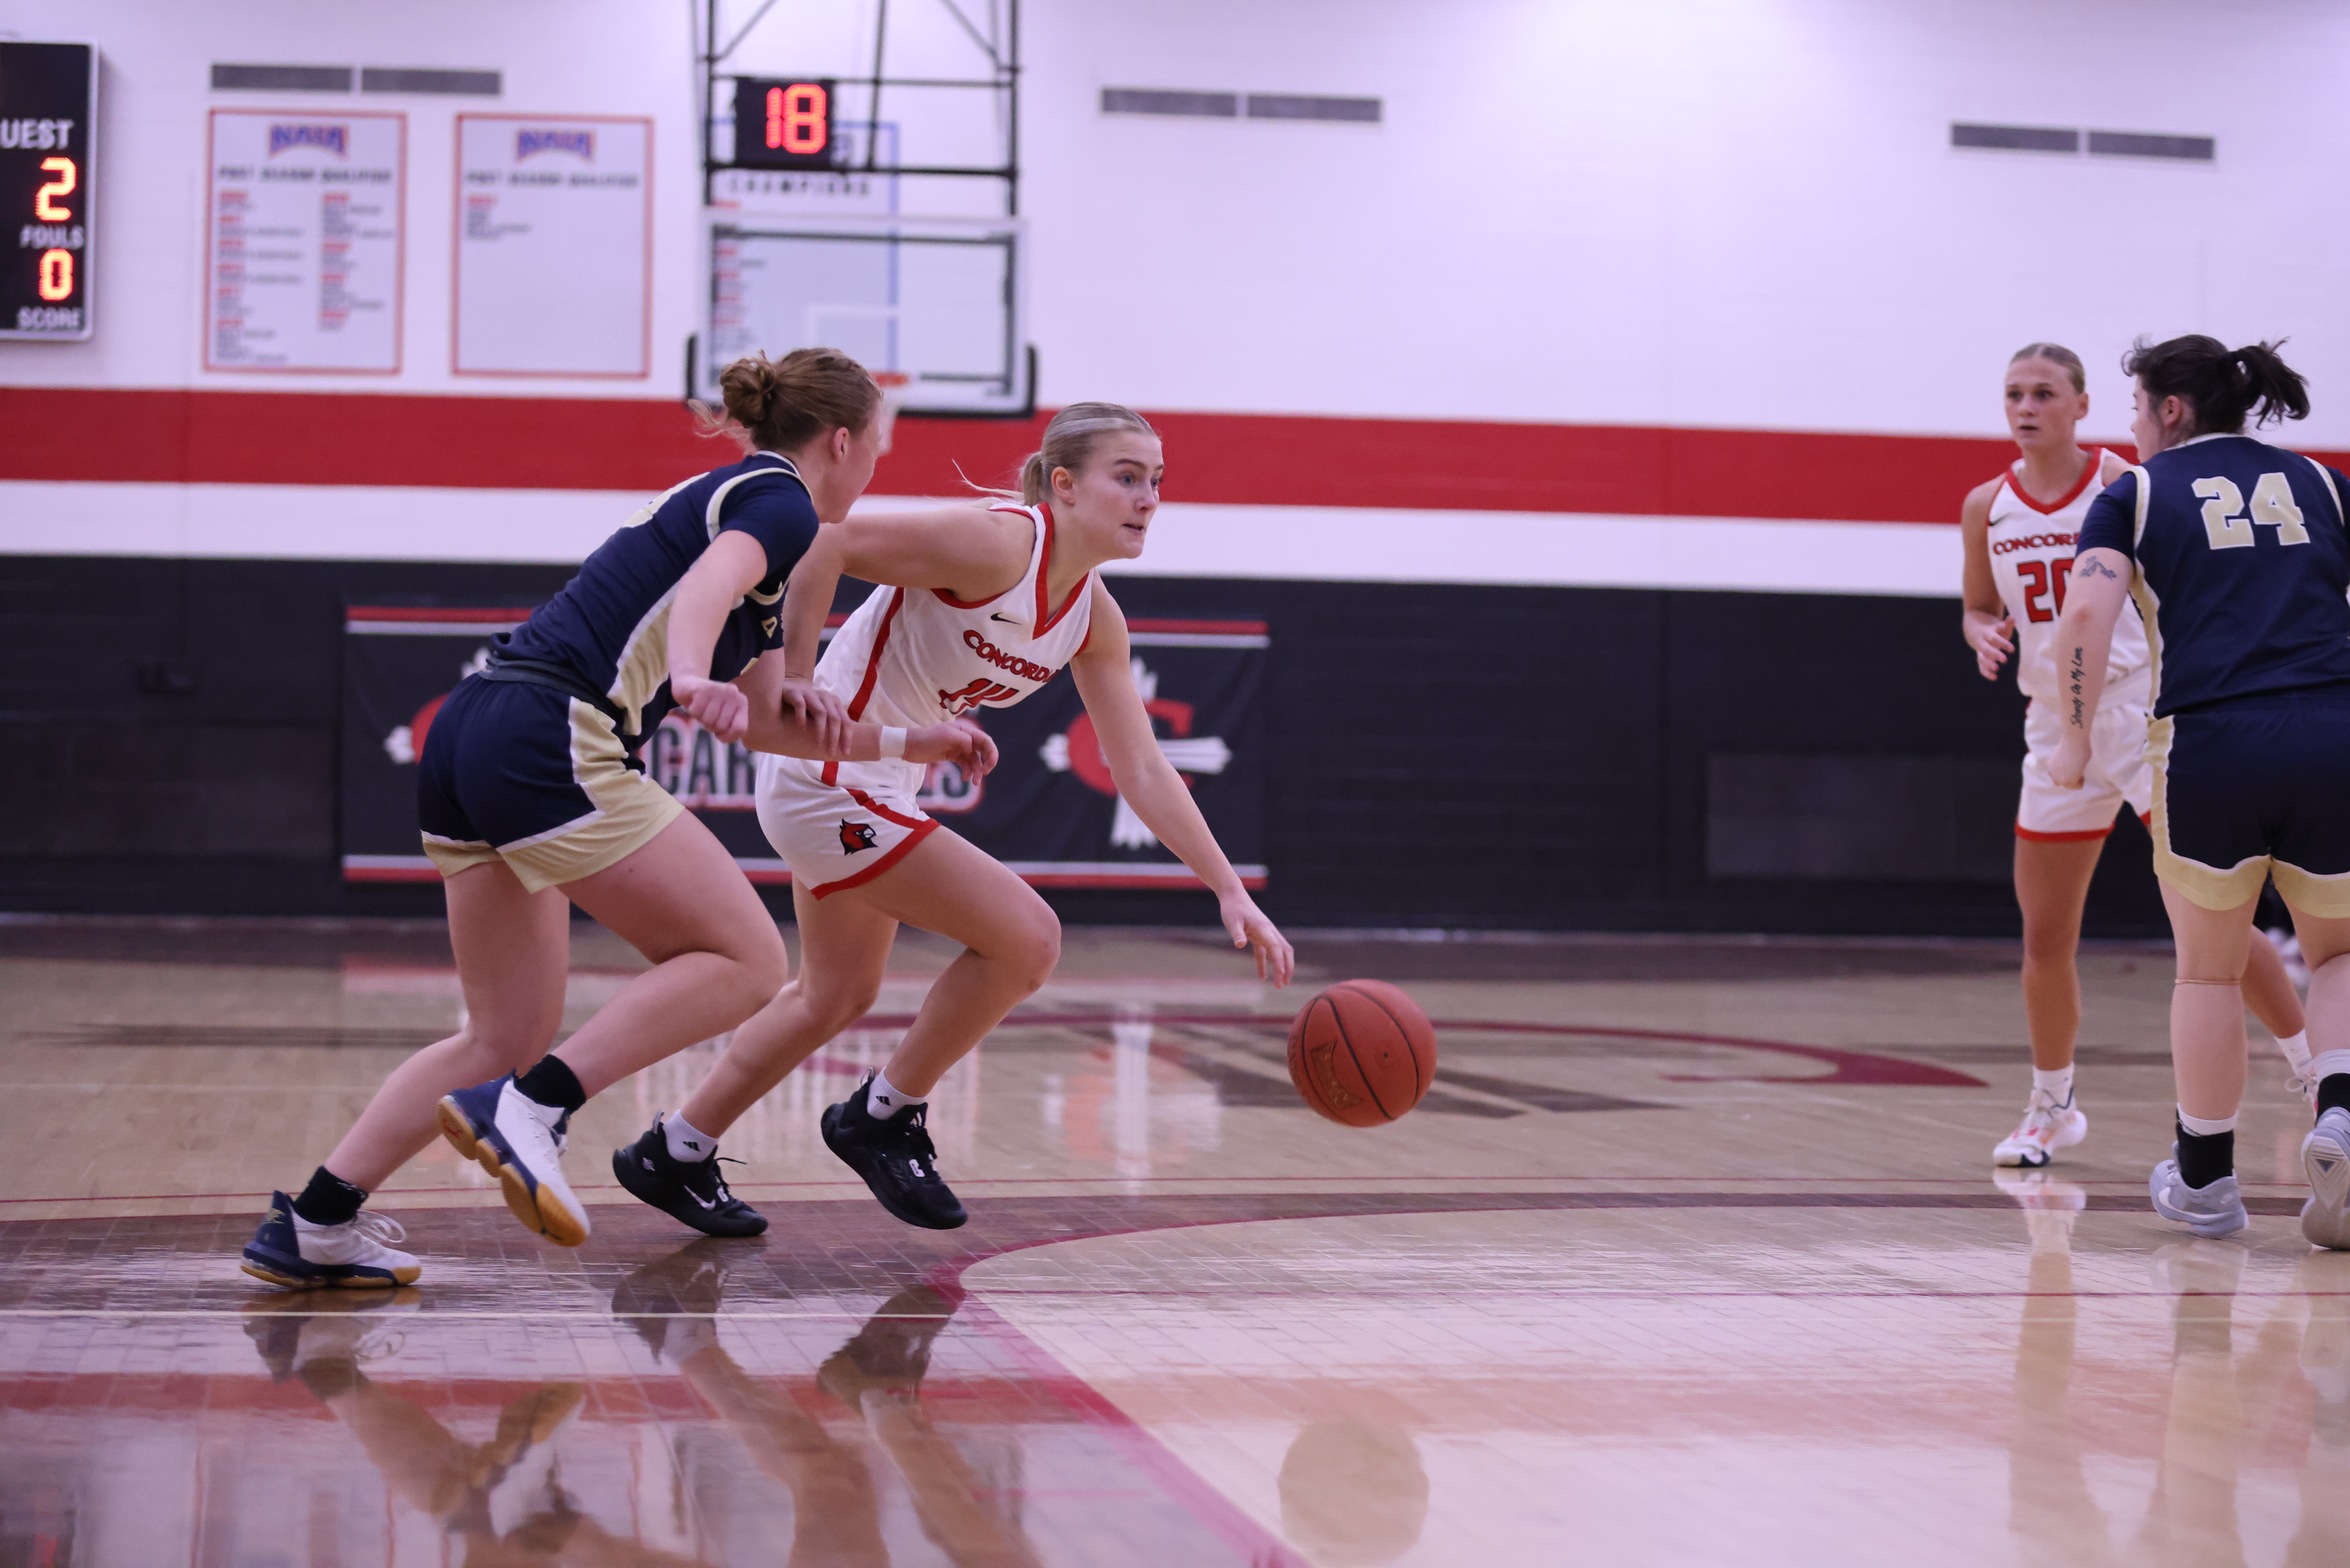 Women's Basketball outlasts Cornerstone 60-54 to remain undefeated in WHAC play